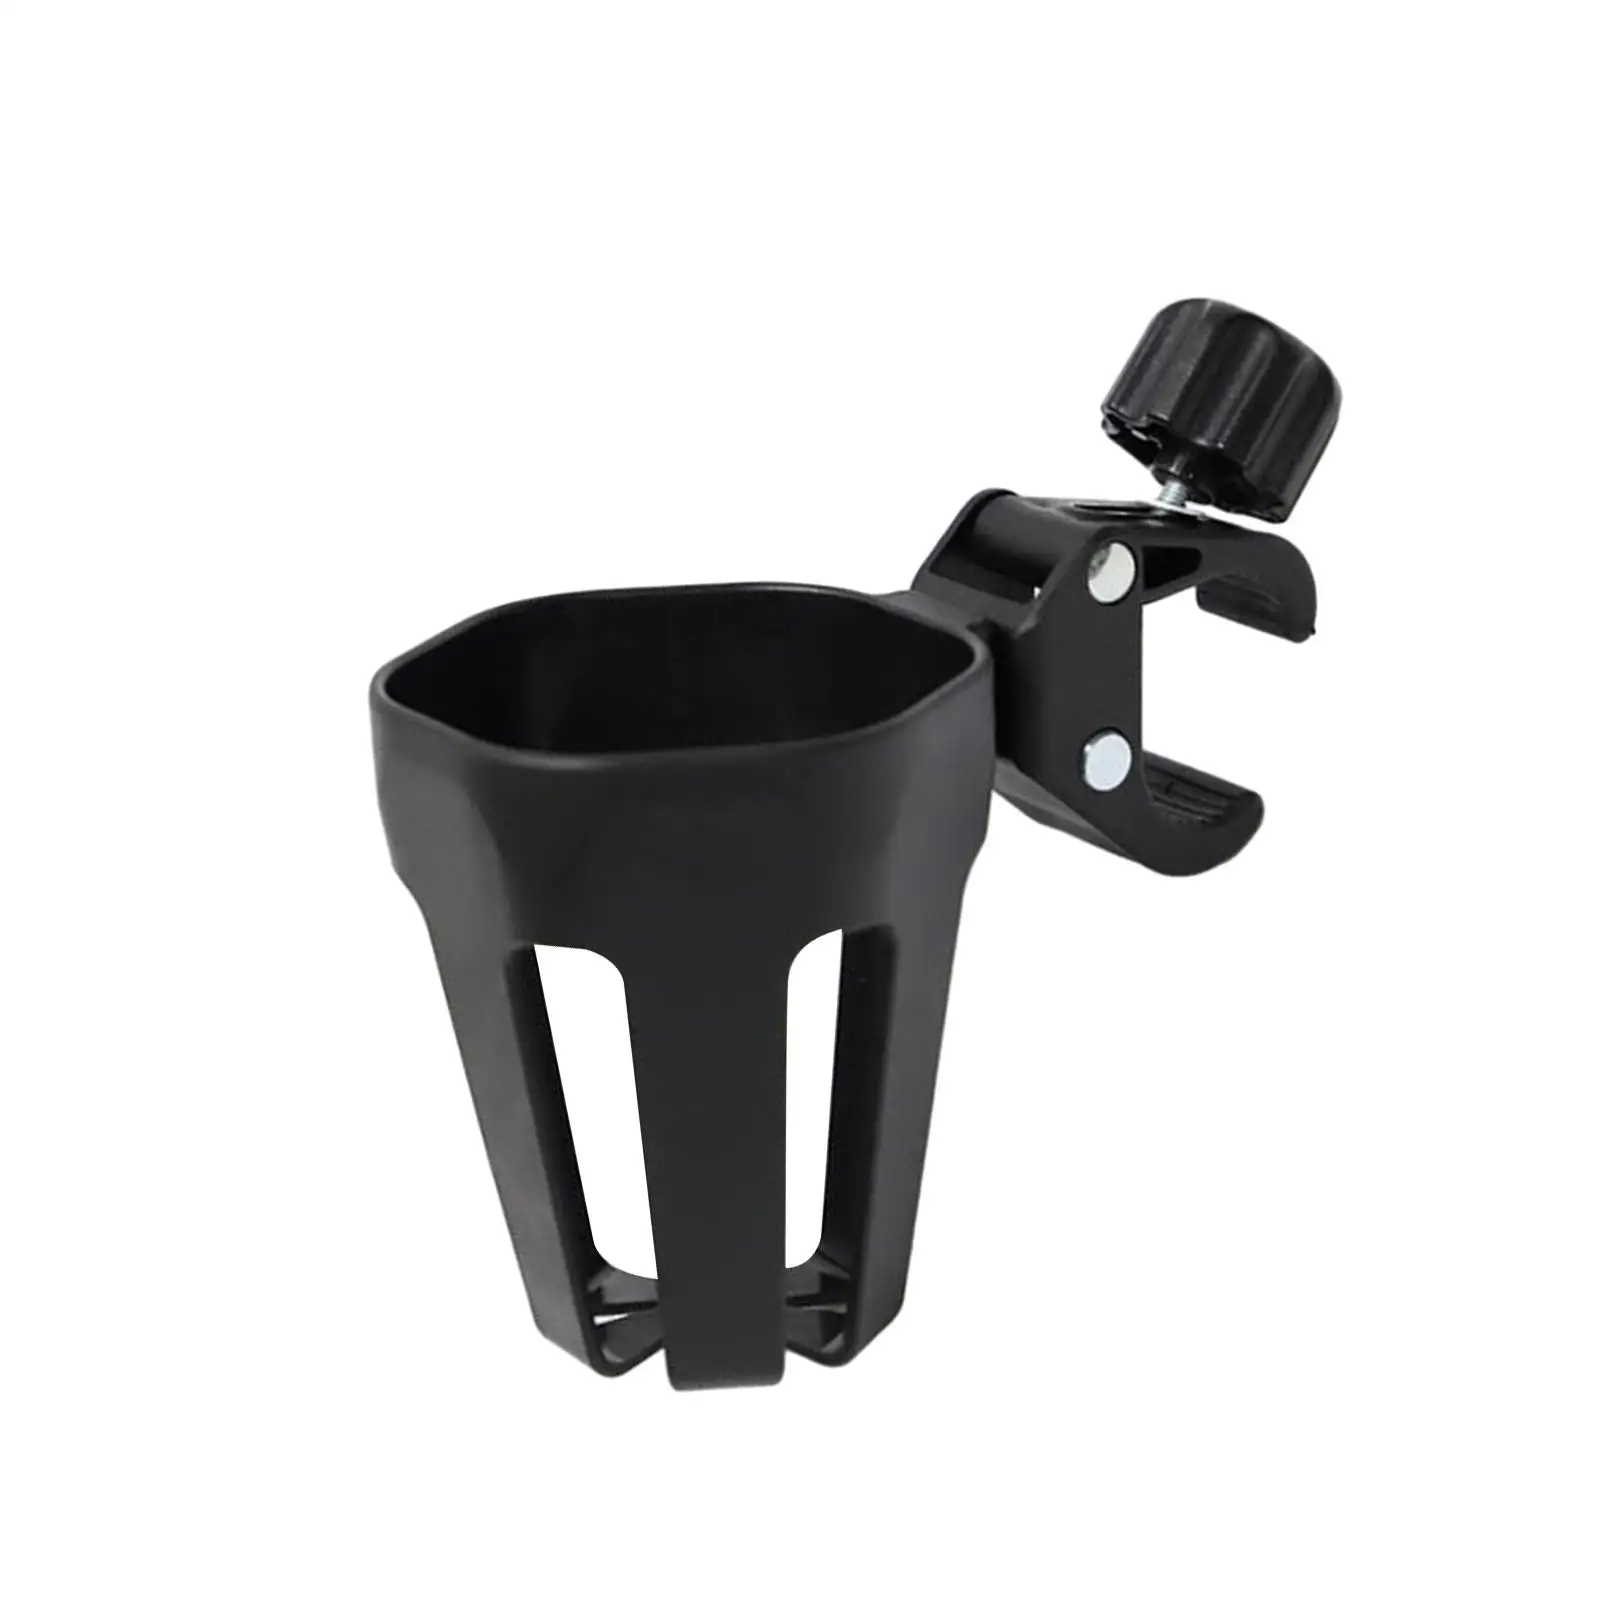 Bicycle Cup Holder Universal Drink Coffee Cup Holder for Pushchair Pram Bike